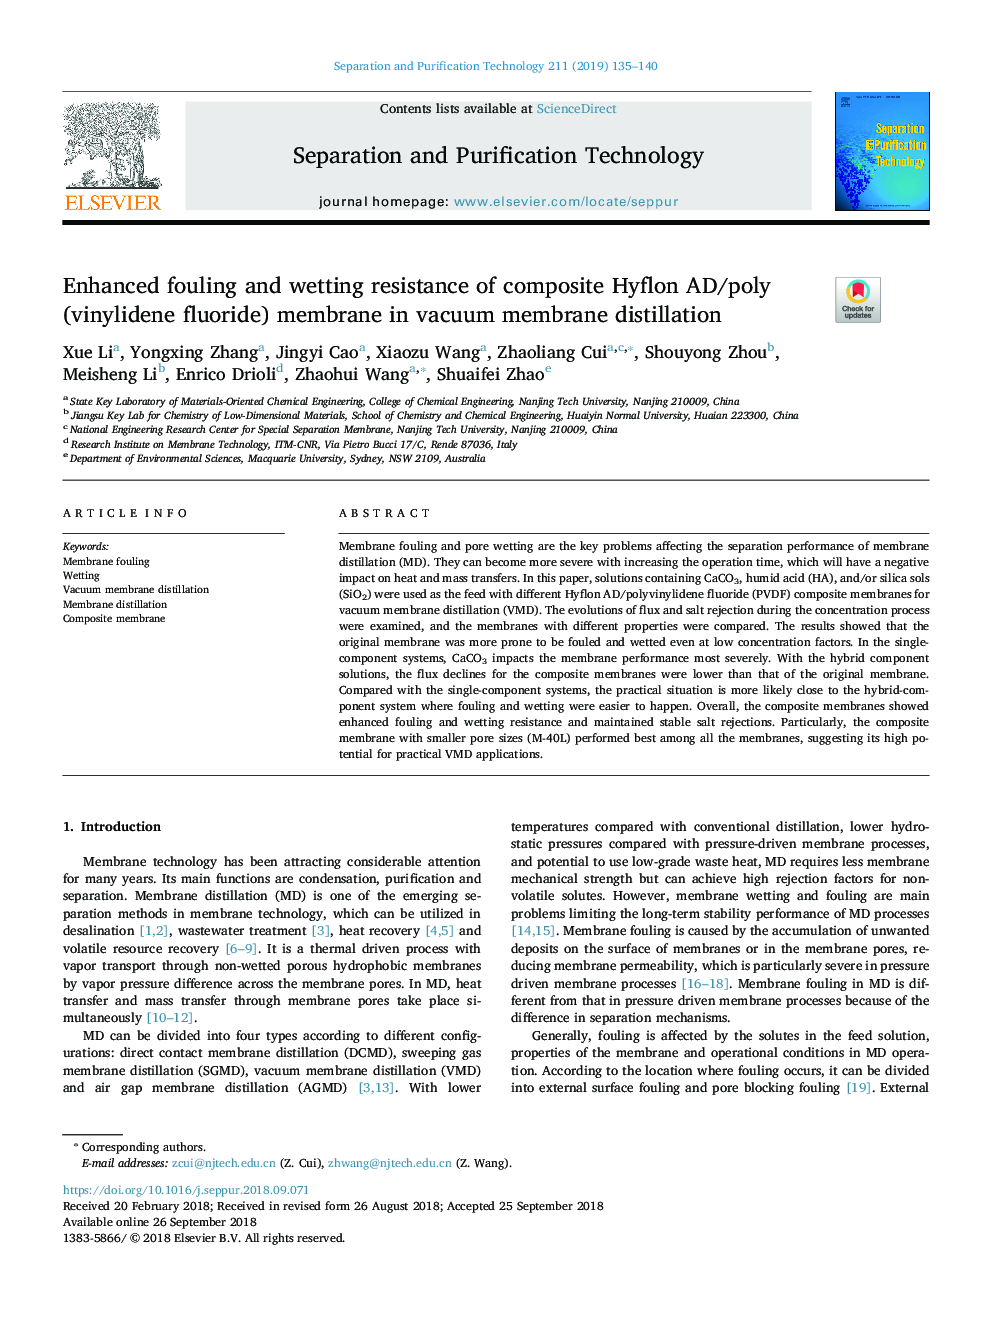 Enhanced fouling and wetting resistance of composite Hyflon AD/poly(vinylidene fluoride) membrane in vacuum membrane distillation